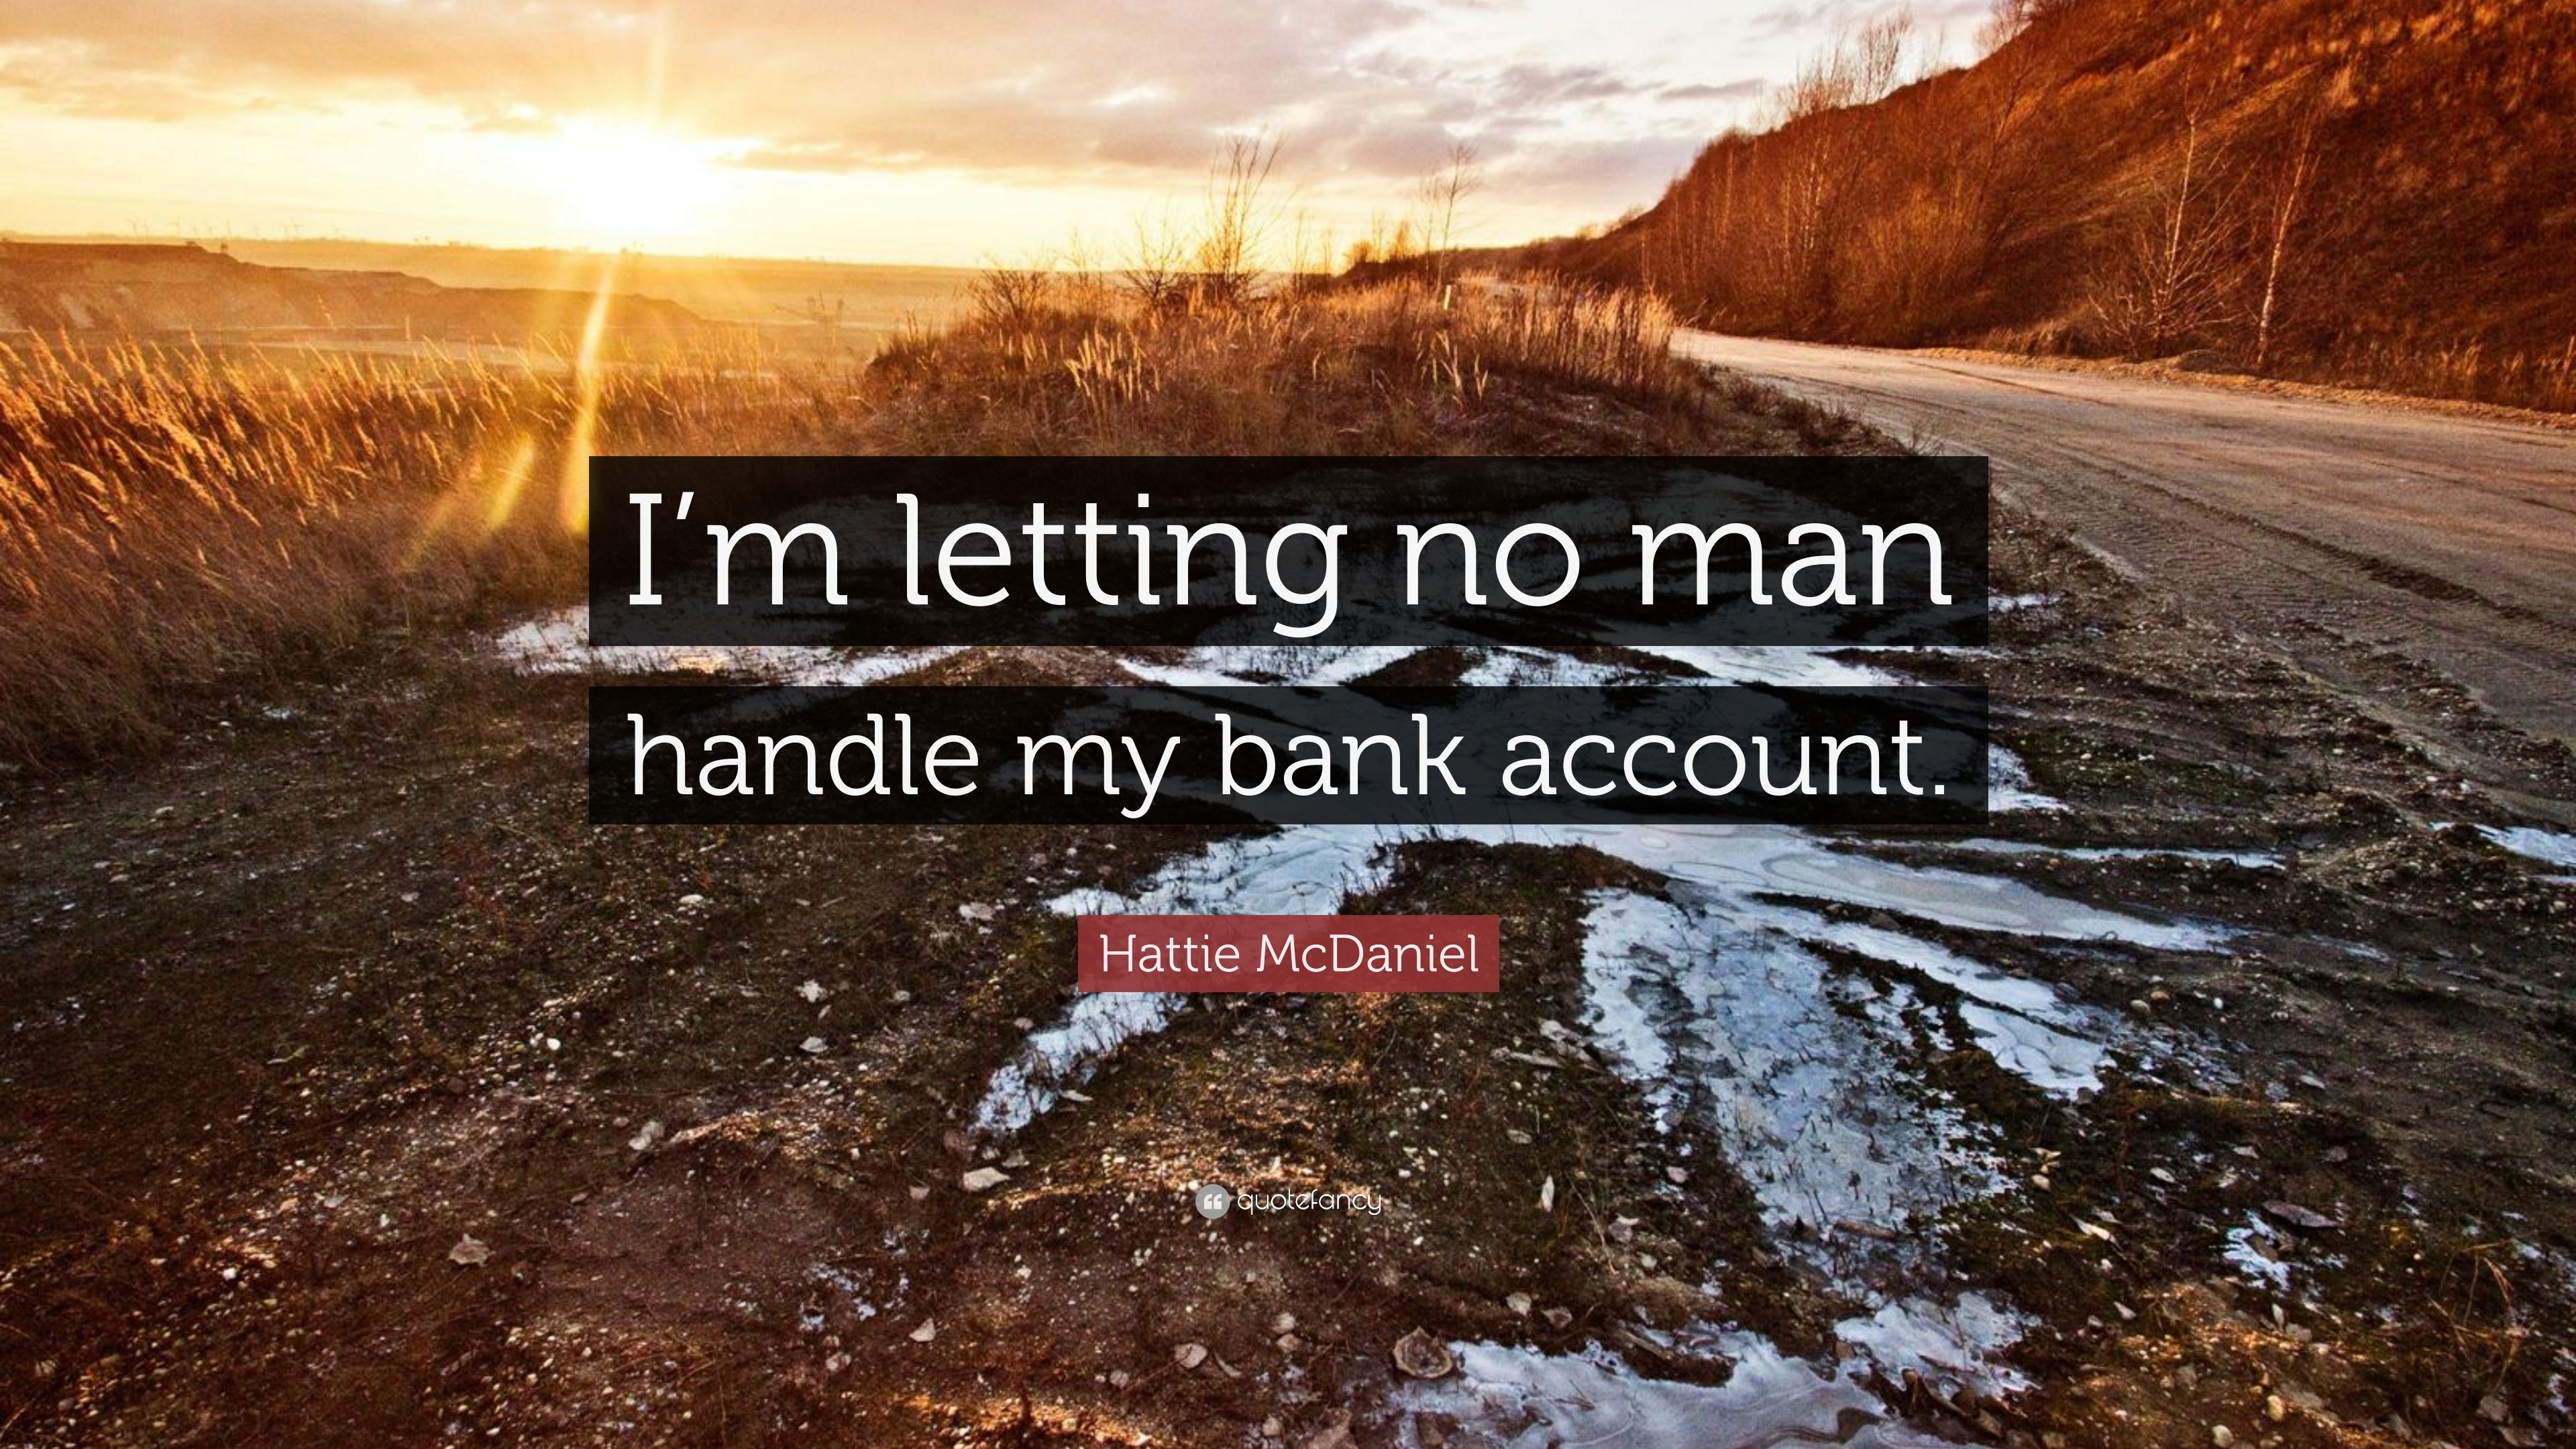 m letting no man handle my bank account .quotefancy.com